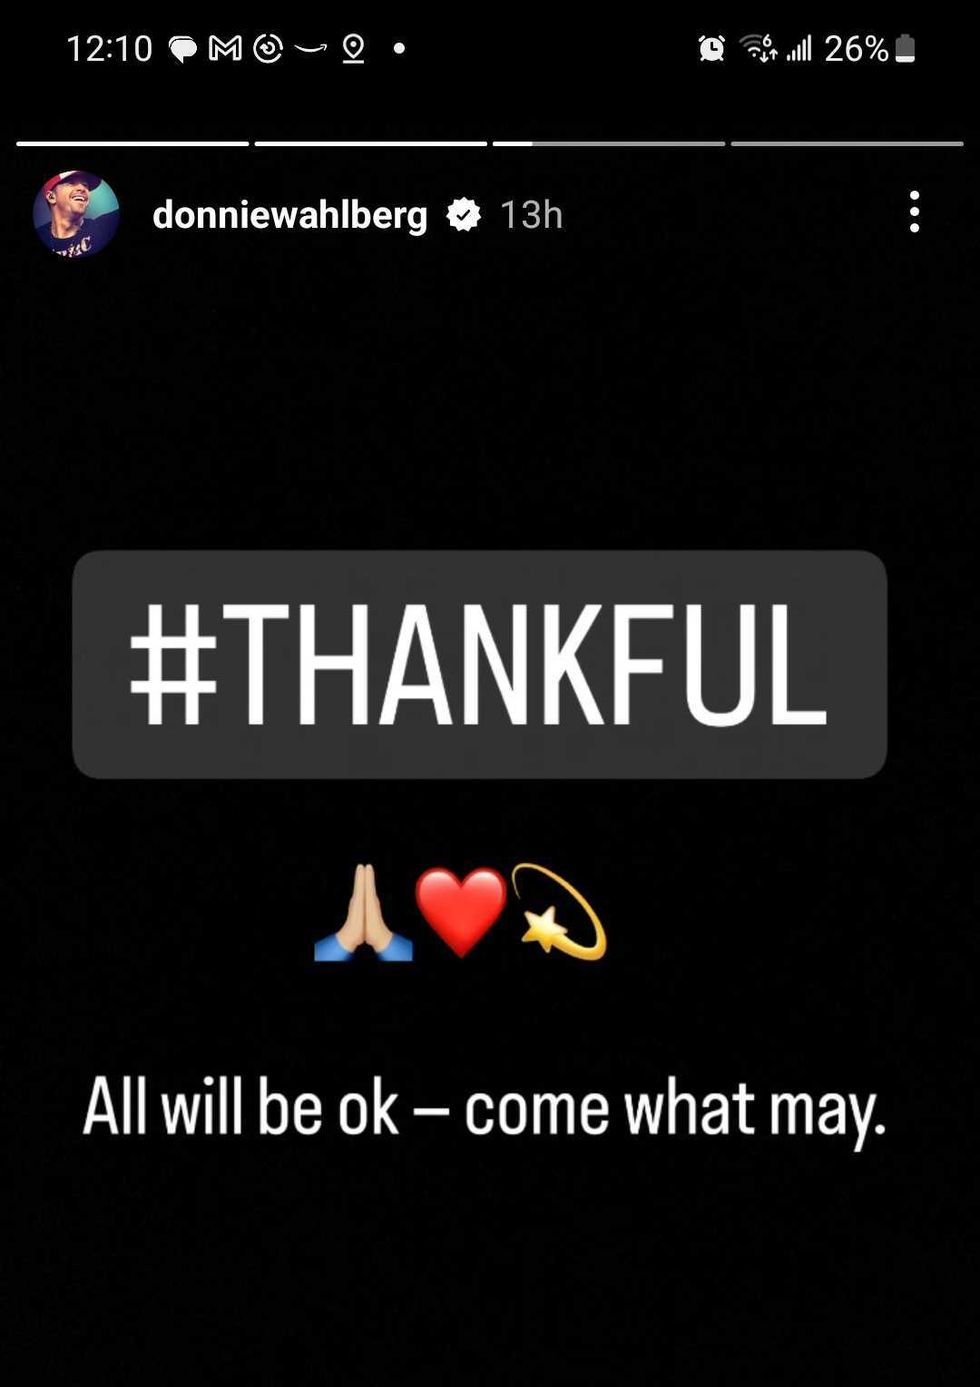 message from donnie wahlberg